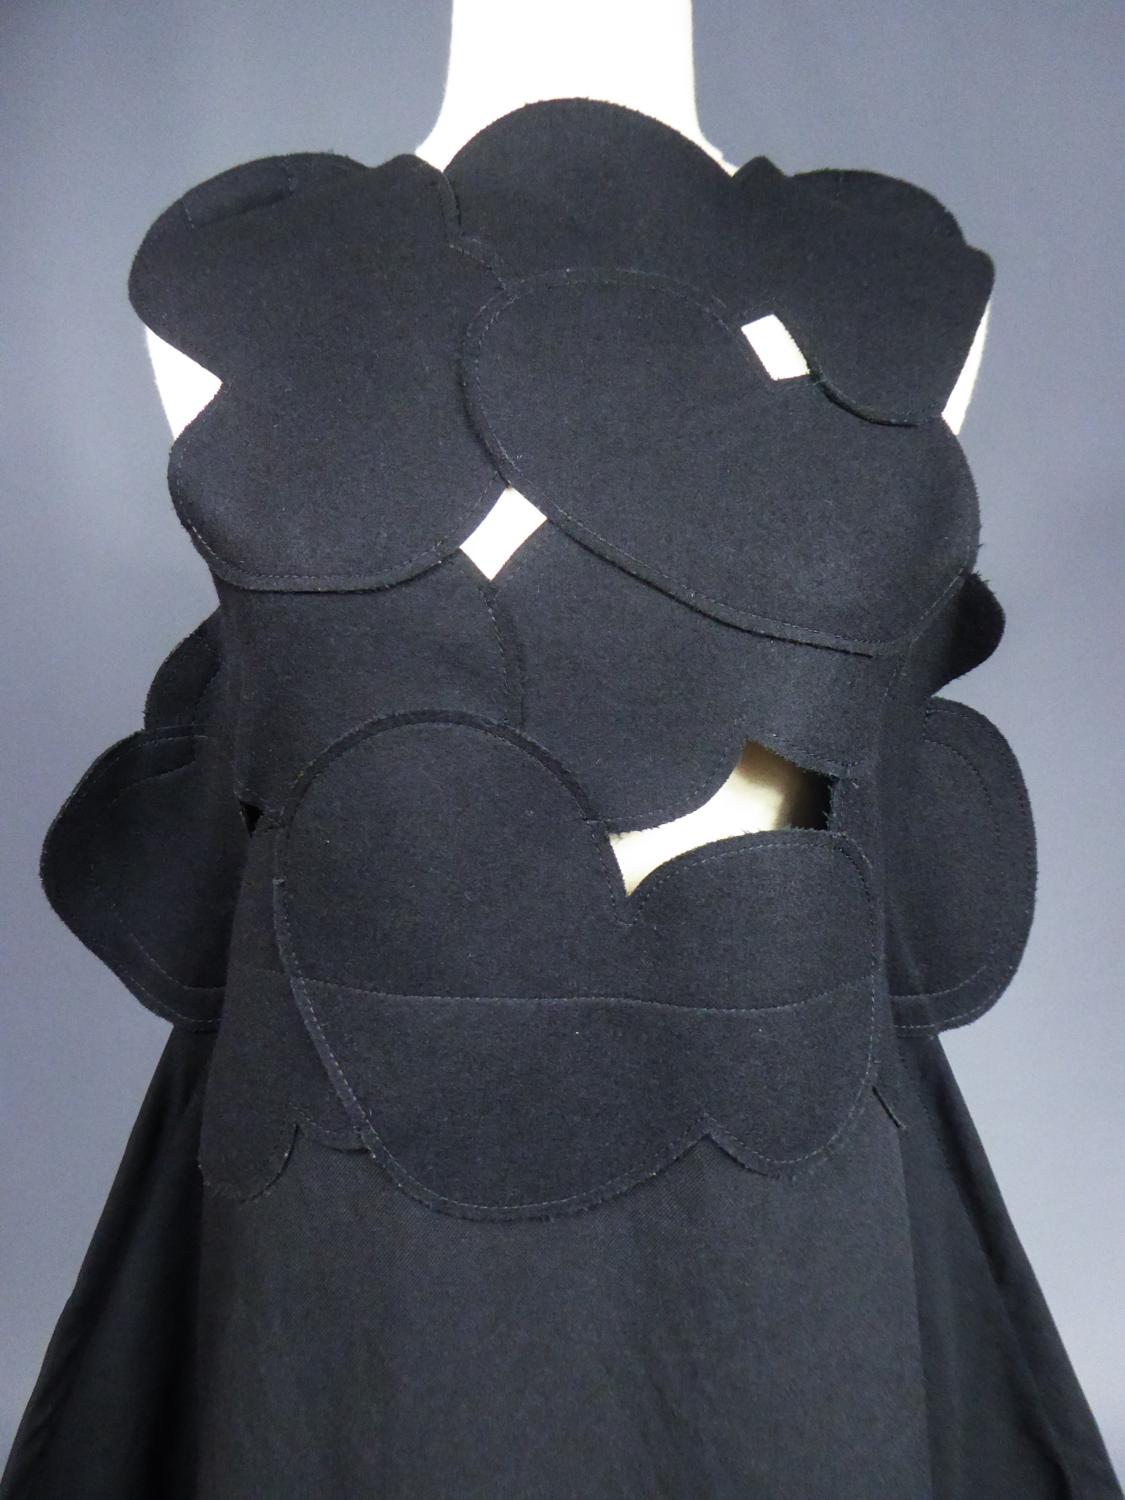 A Comme des Garcons Junya Watanabe Black Woollen Chasuble Dress Circa 2000 For Sale 1